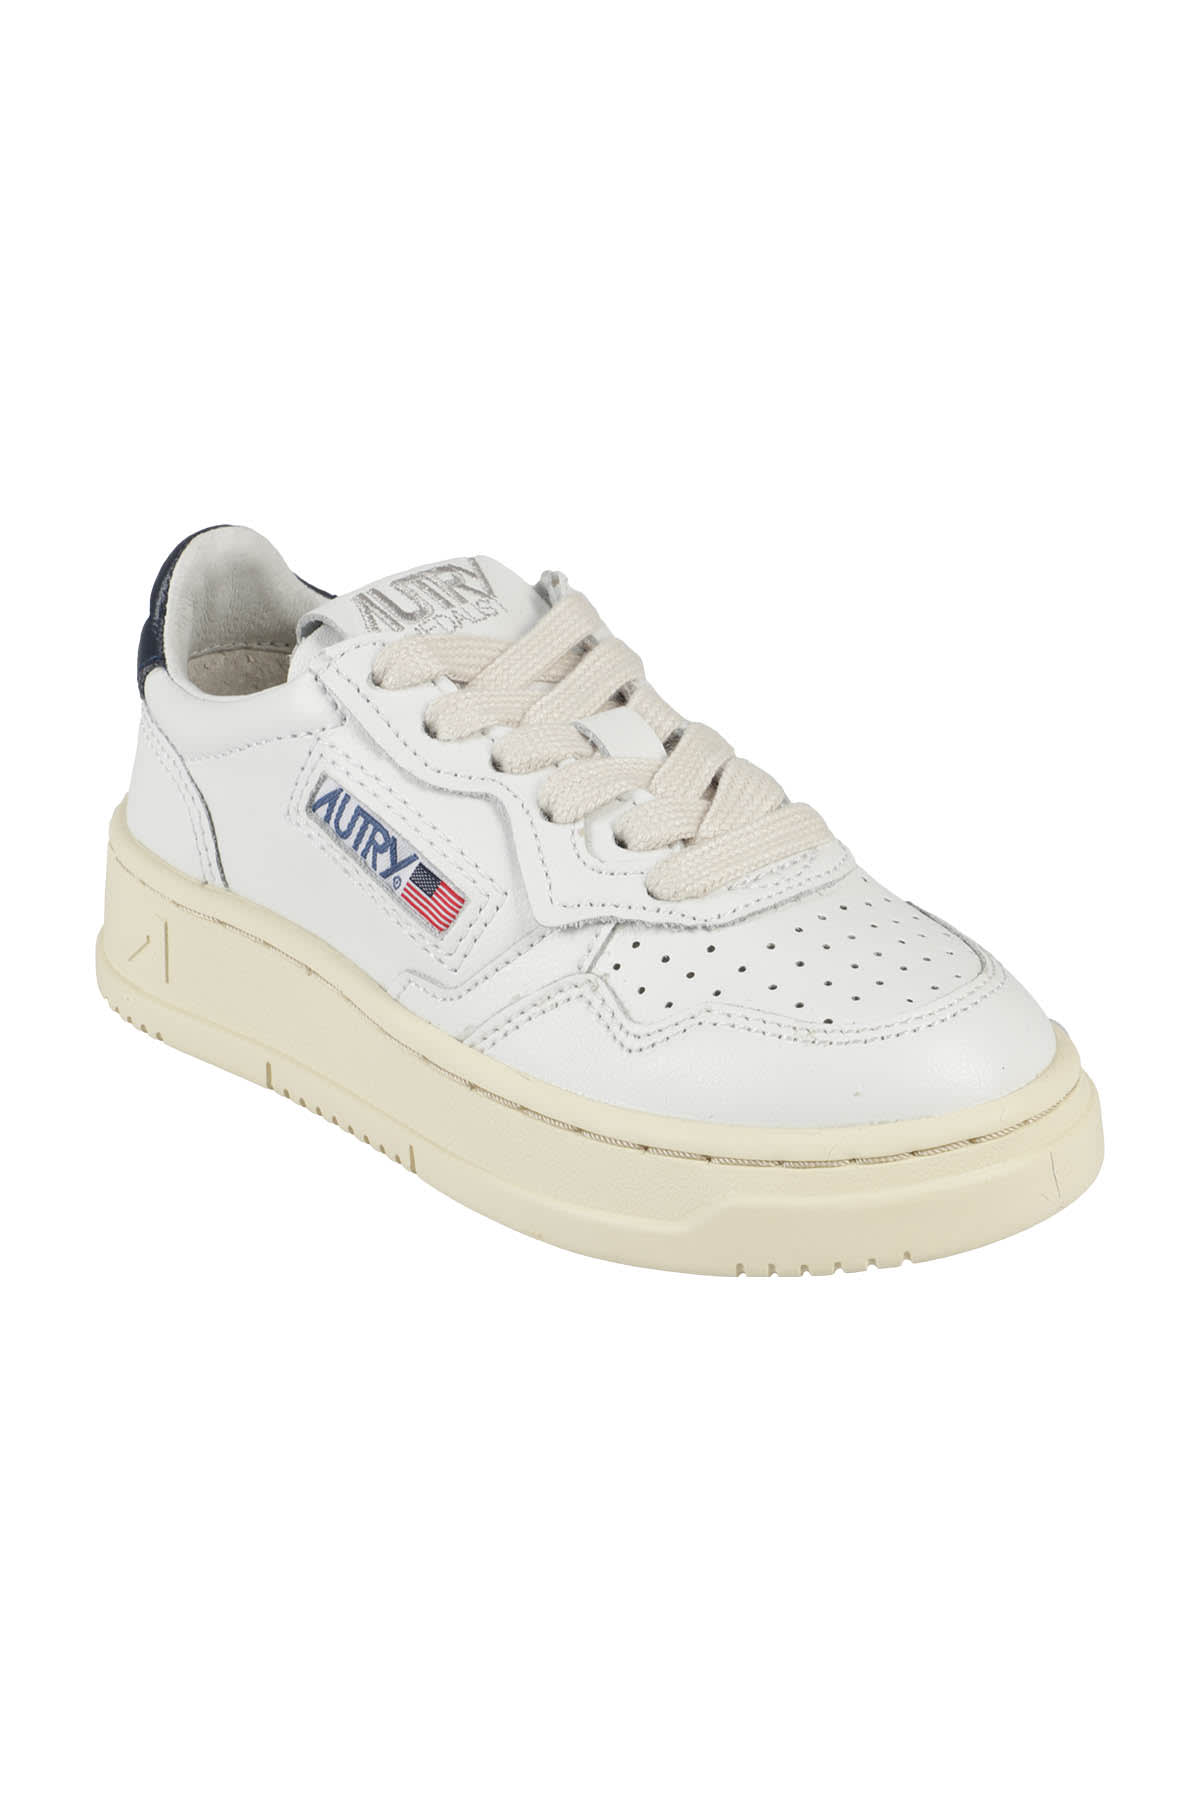 Shop Autry Low Kid In White Space